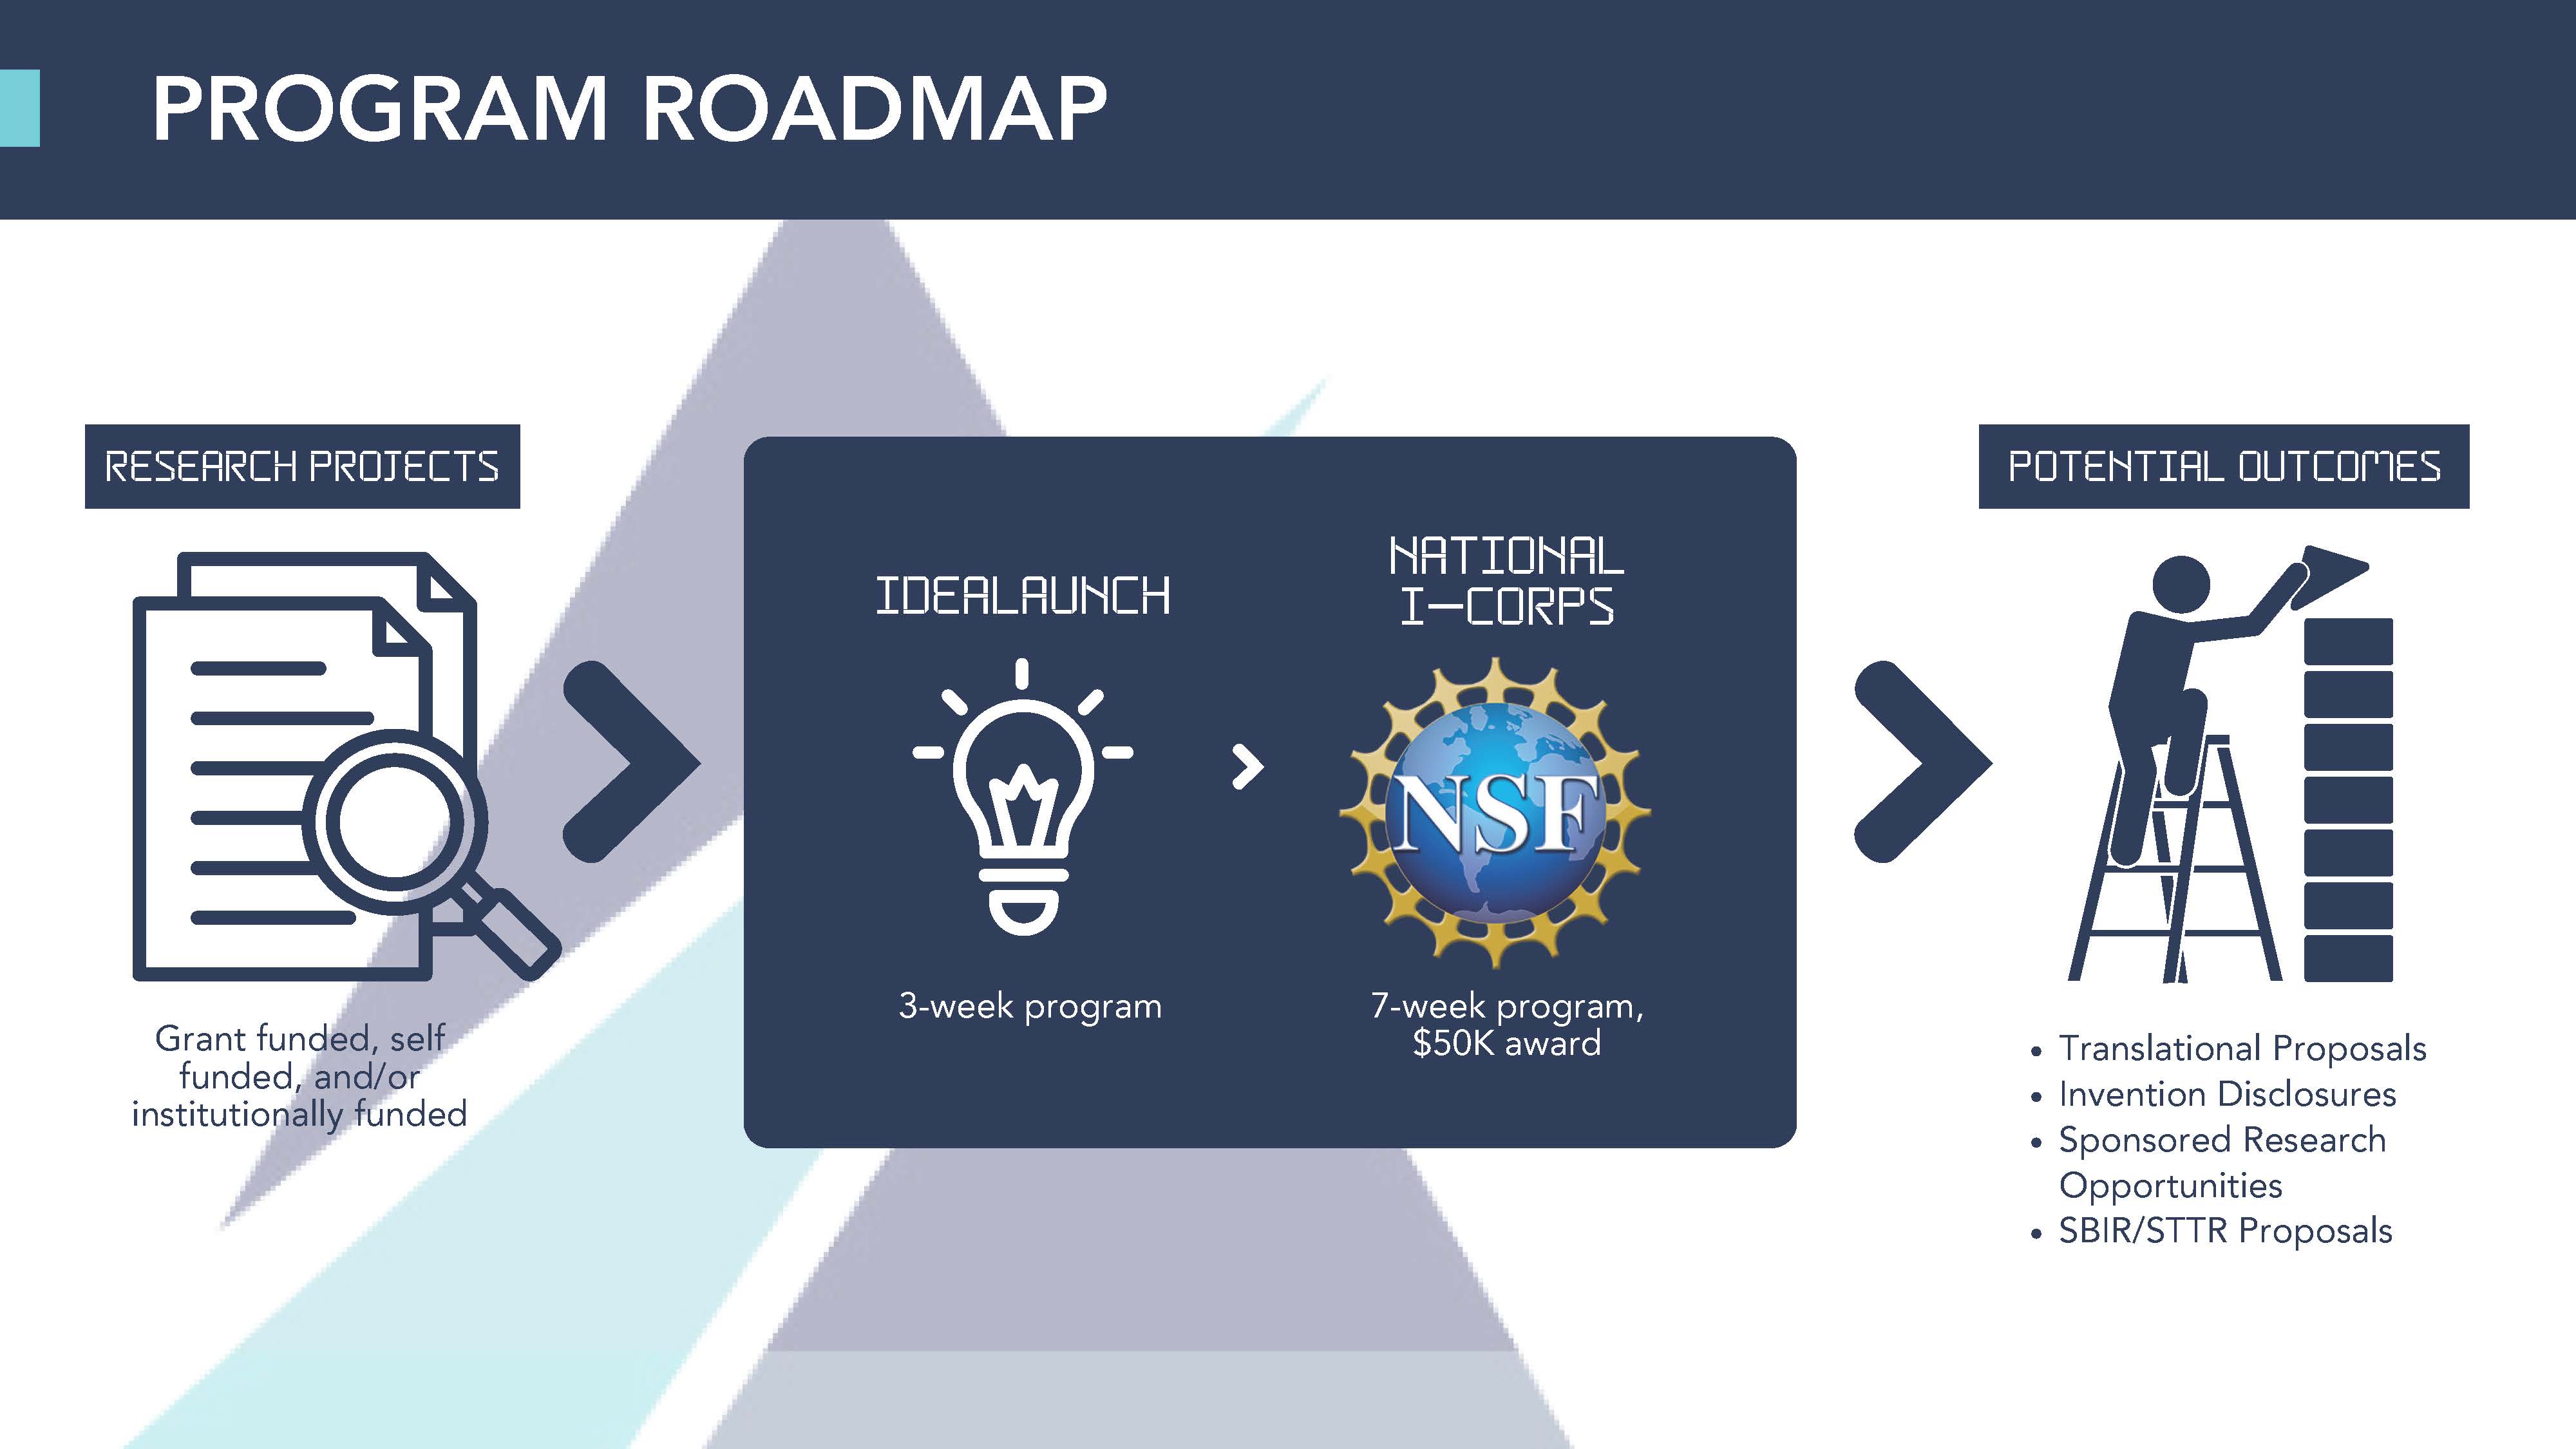 An illustration representing the roadmap of how a research project goes through IdeaLaunch program to NSF I-Corps through to a potential outcome.